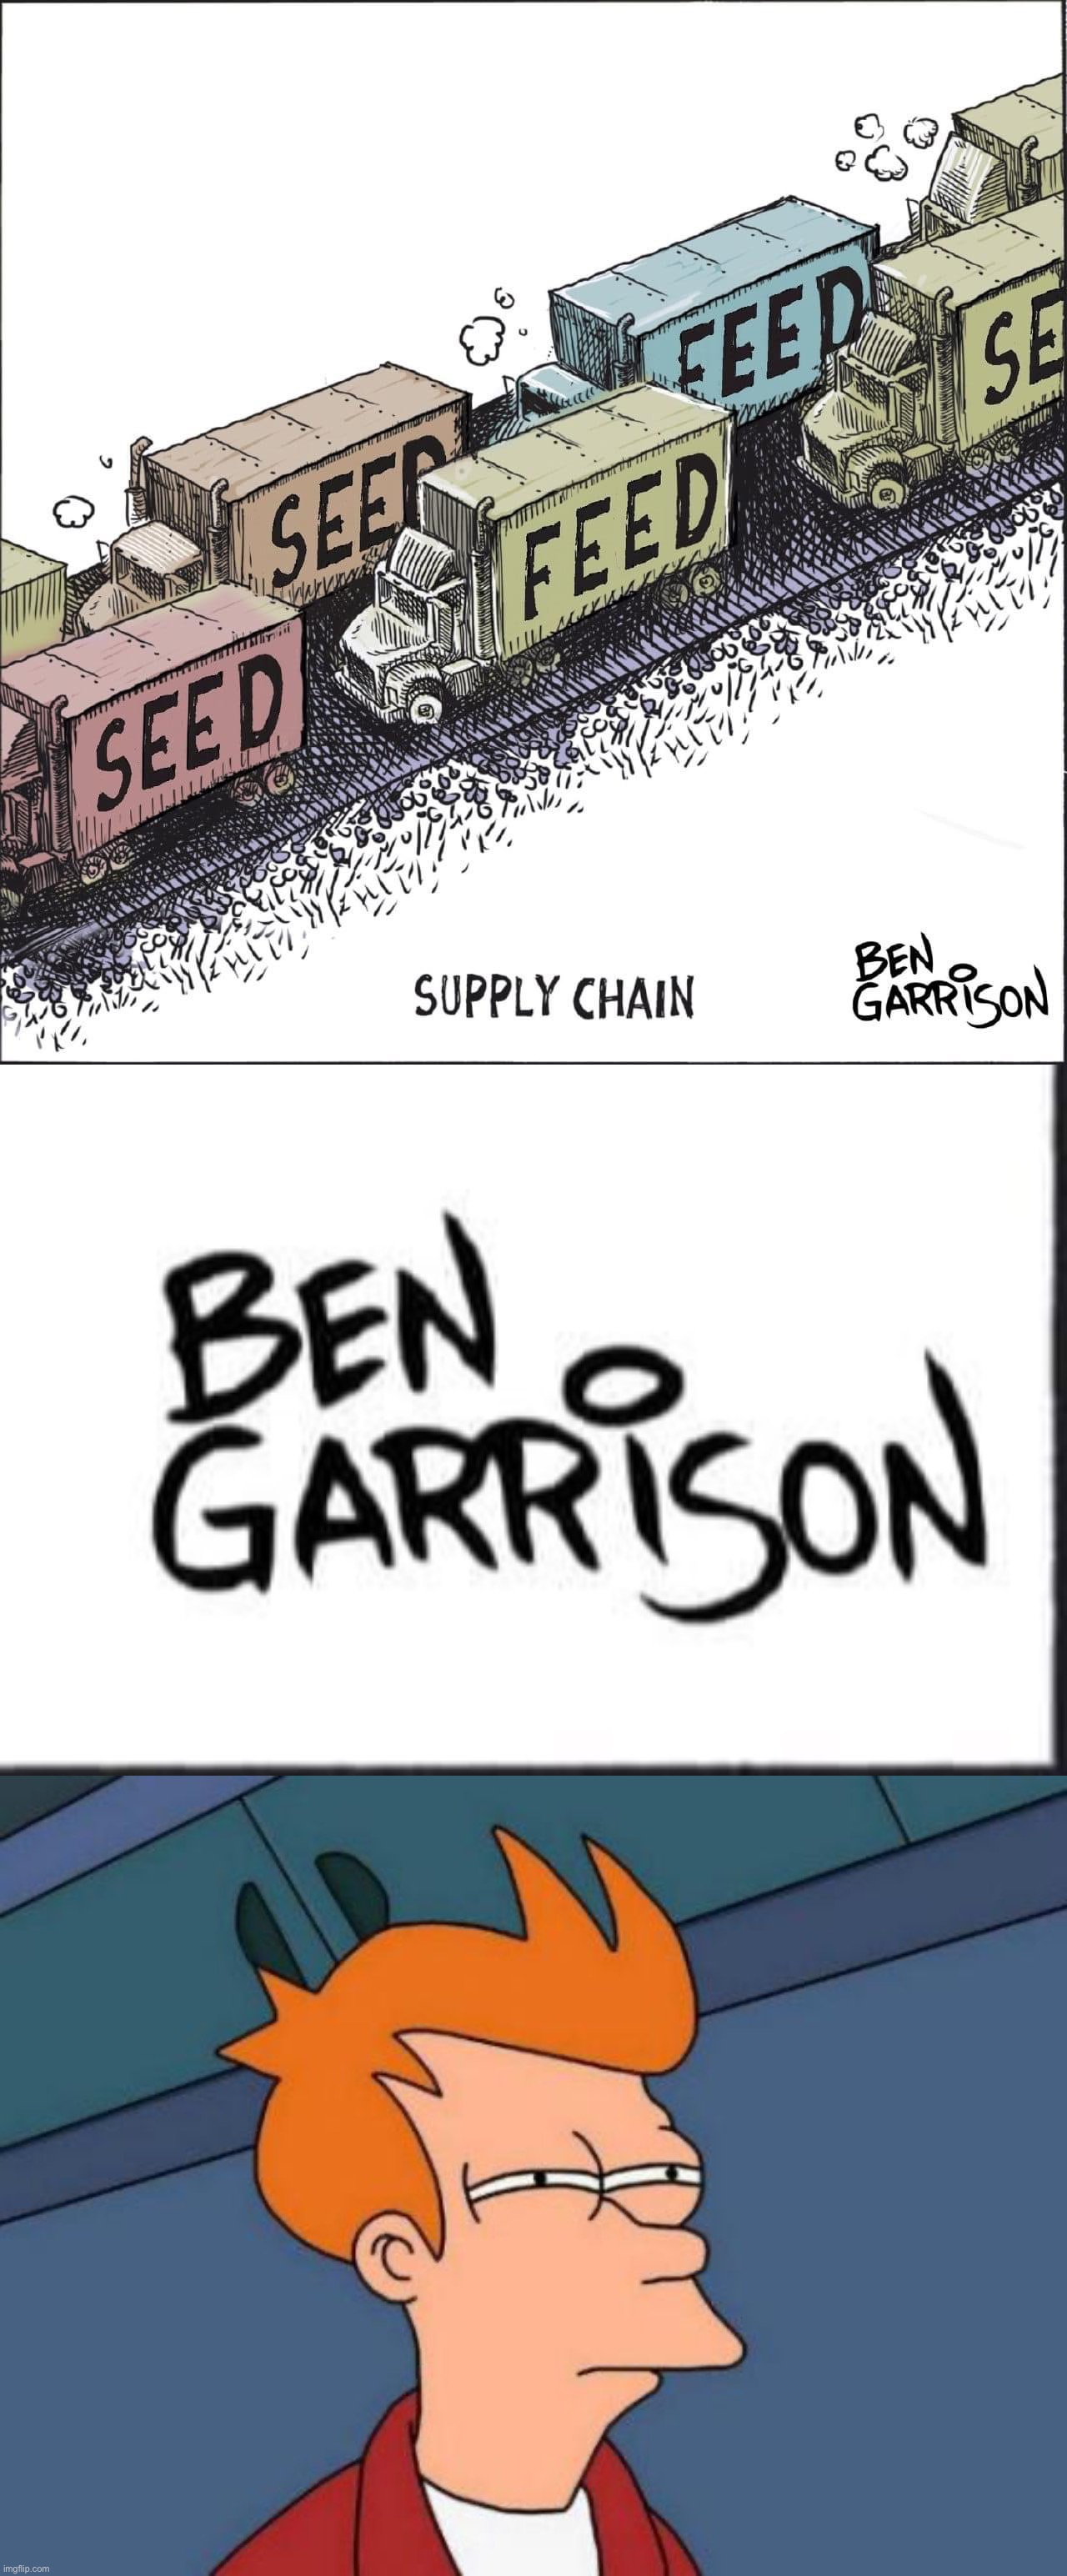 *sees it’s by Ben Garrison* *checks internal triggered gauge* *unable to locate the triggered* | image tagged in ben garrison supply chain,memes,futurama fry,ben garrison,triggered gauge,unable to locate the triggered | made w/ Imgflip meme maker